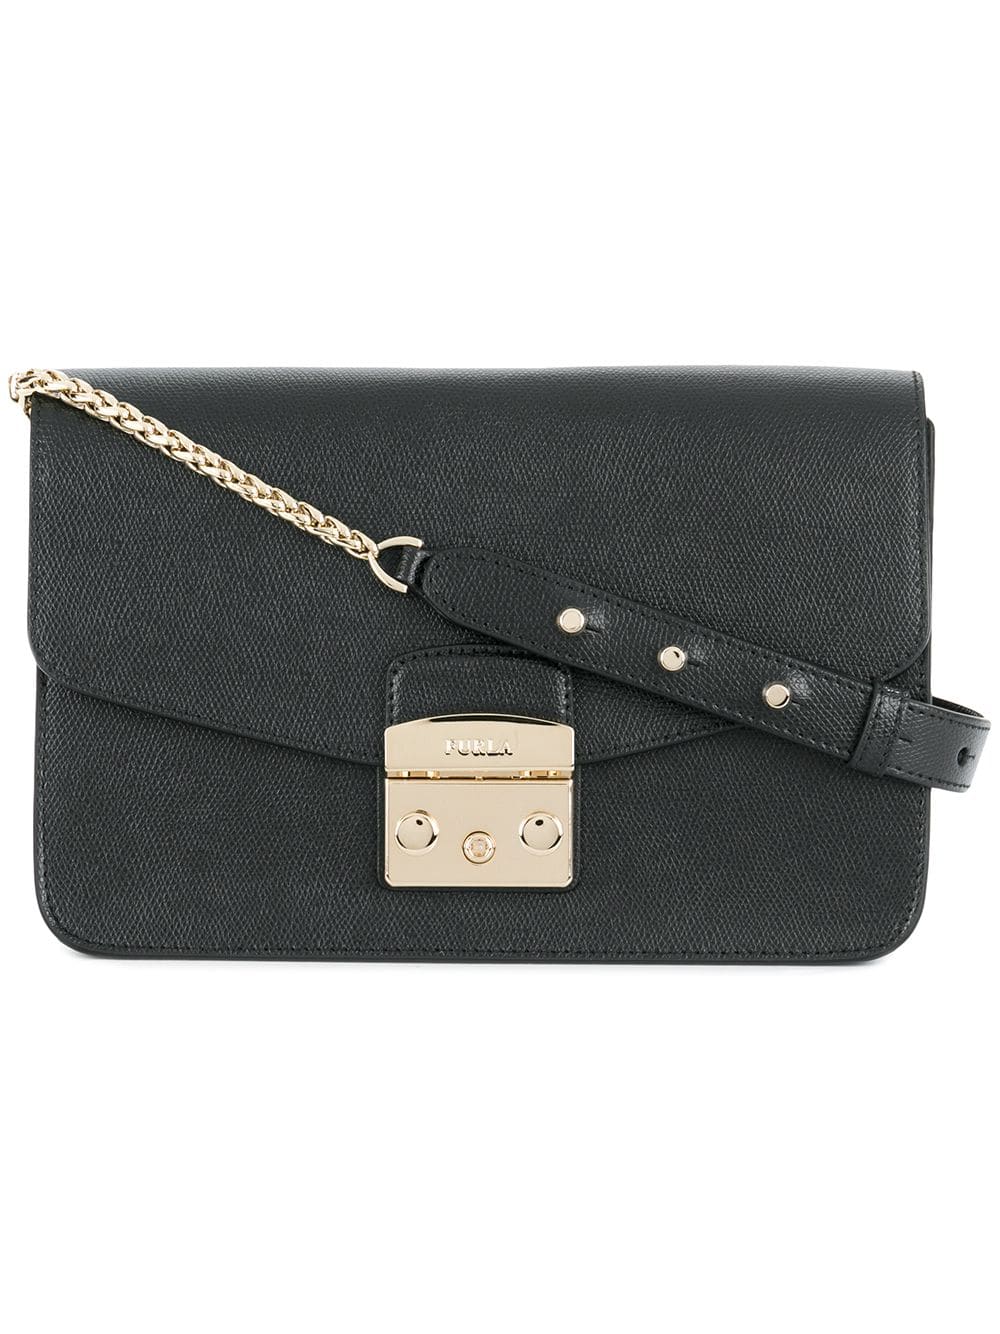 M S Leather House: M S Leather Cross Body Bag